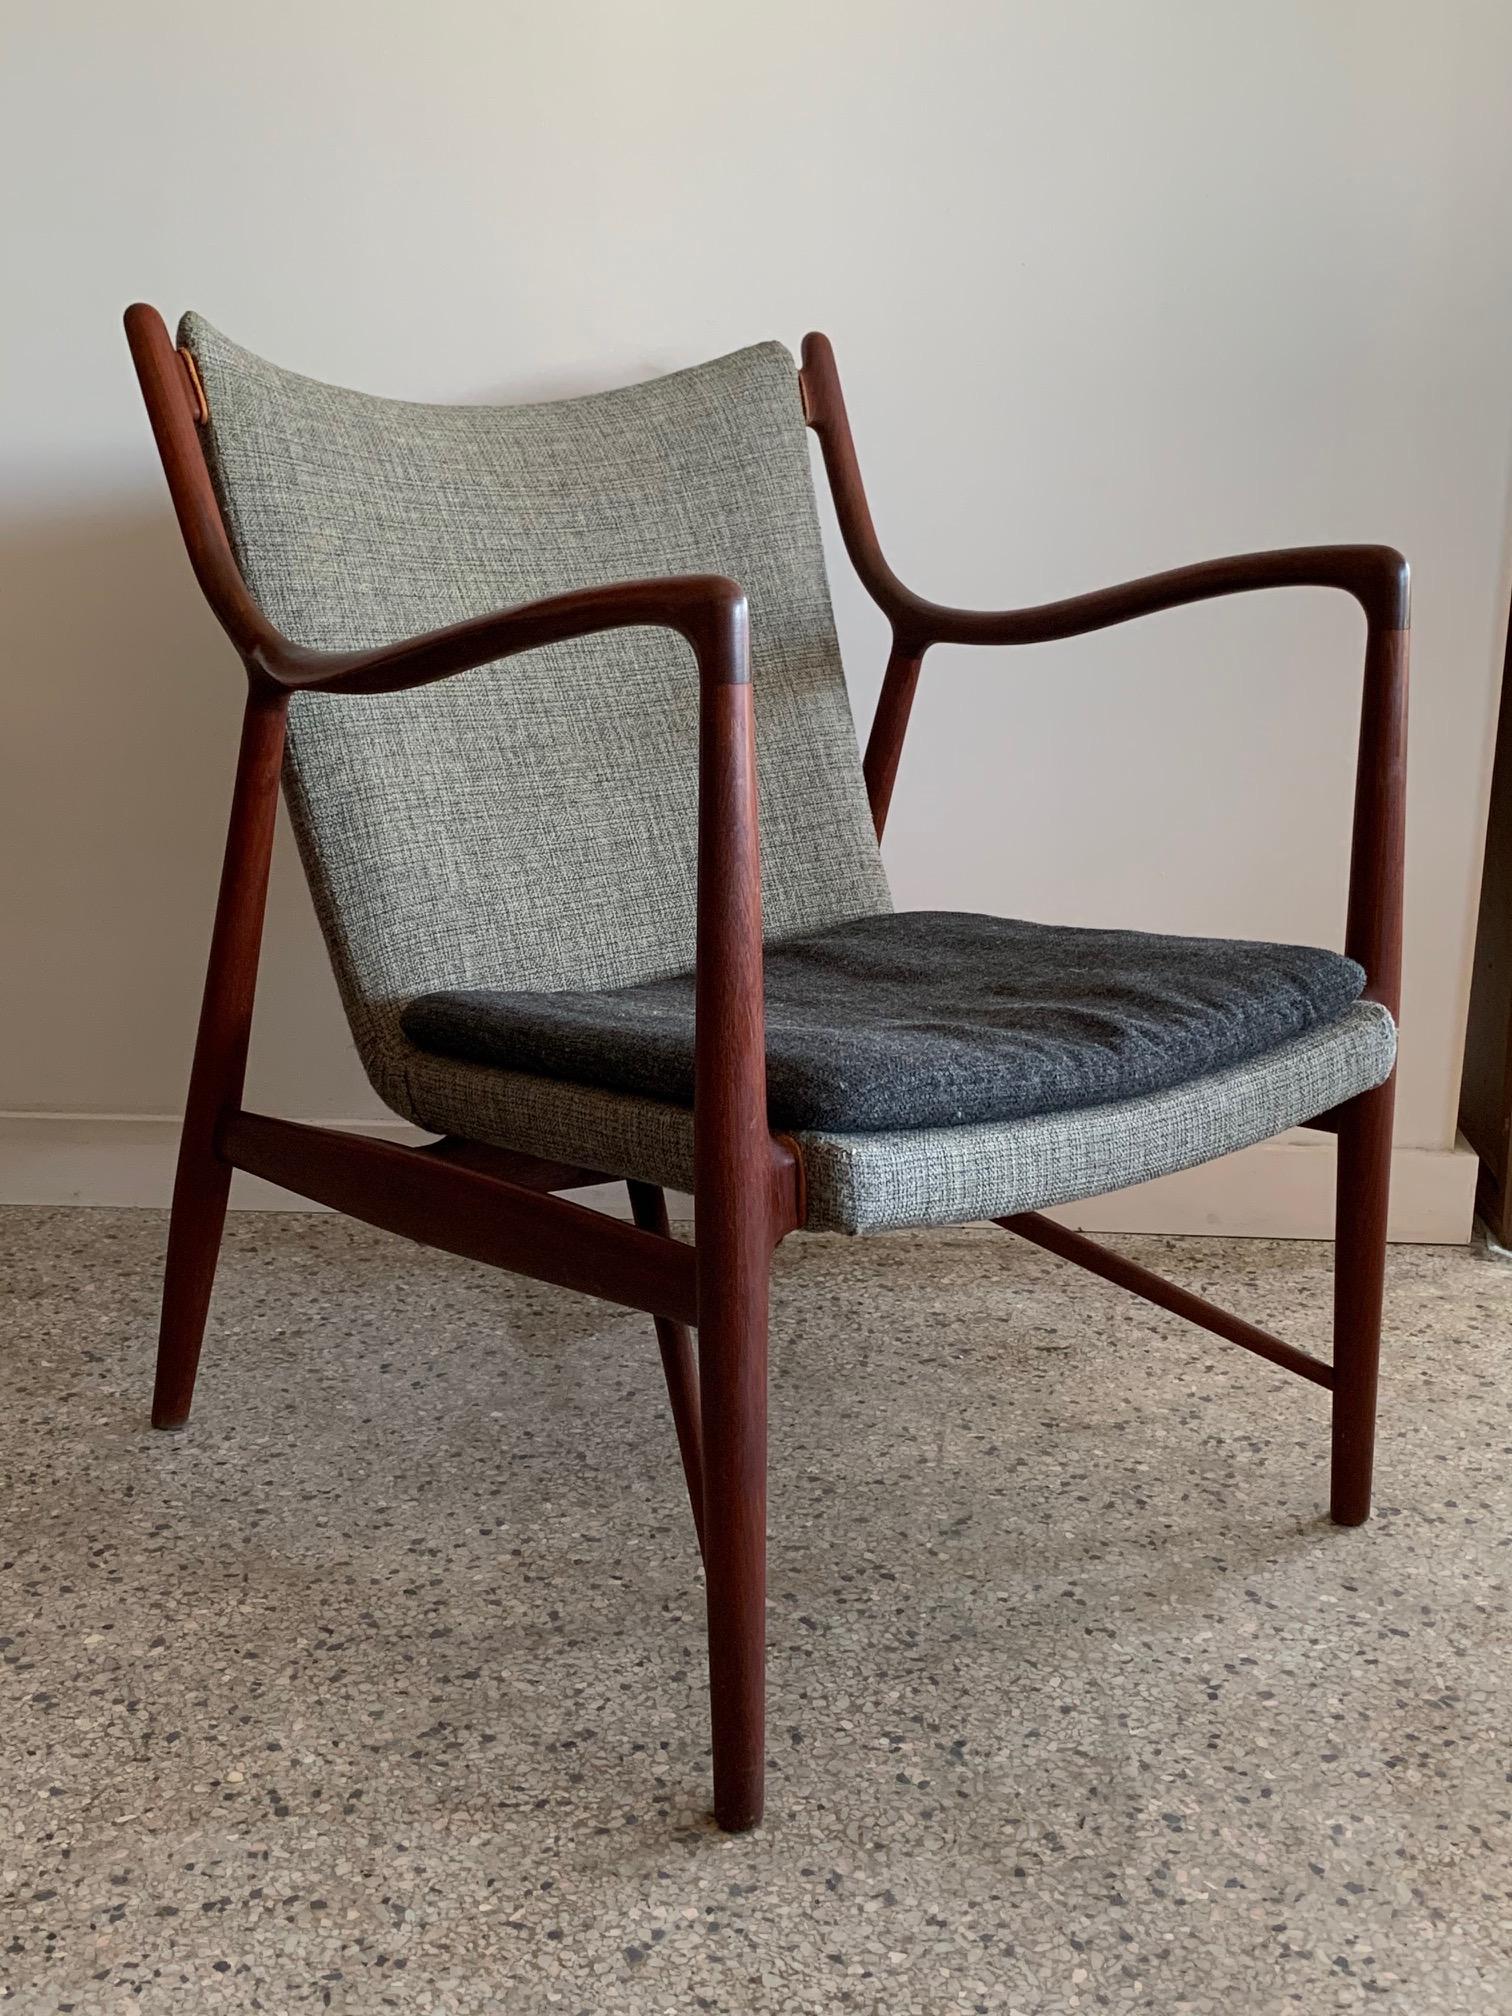 A classic original Finn Juhl NV45 chair in teak by Niels Vodder, Denmark, circa 1950s. This fine example retaining its original two tone wool upholstery. One of the most elegant chairs ever made, this is a timeless design. This one has a beautiful